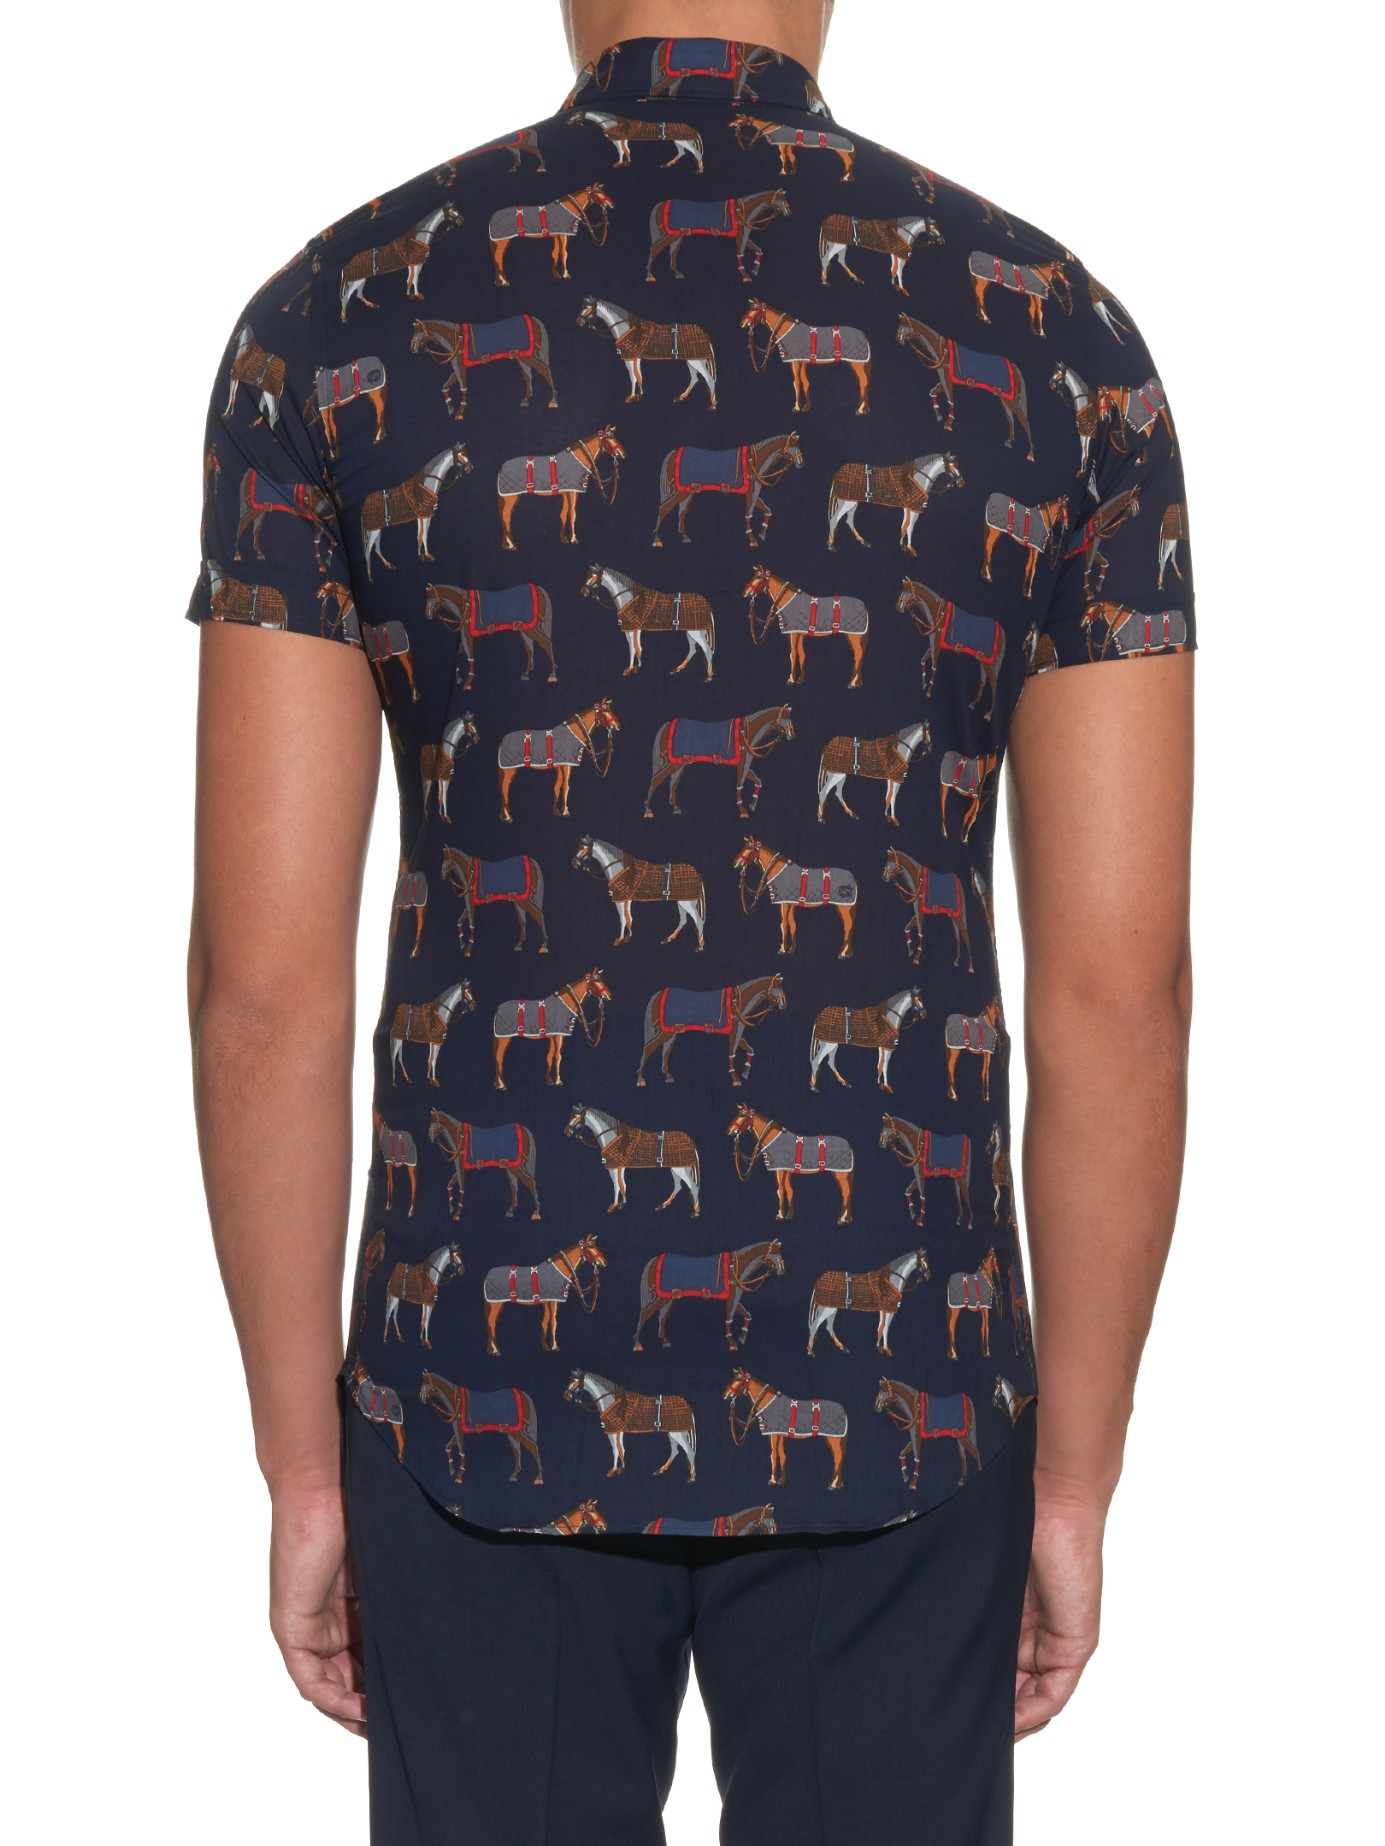 Lyst - Gucci Horse-print Cotton Shirt in Blue for Men